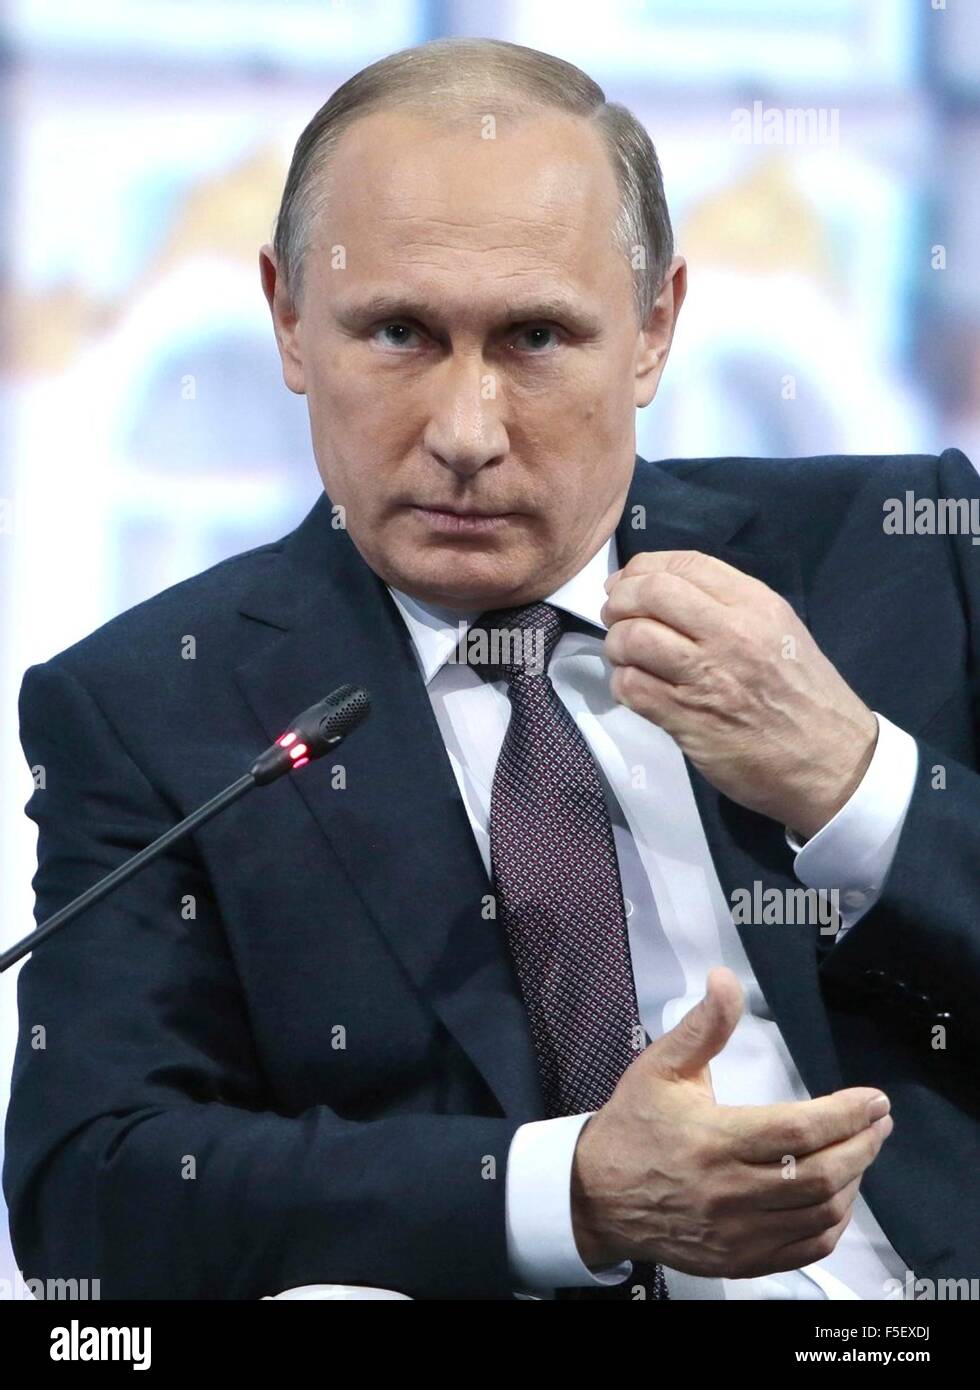 Russian President Vladimir Putin during the Truth and Justice Media Forum of independent regional and local media sponsored by the Russian Popular Front at the Lenexpo Exhibition Center April 28, 2015 in St. Petersburg, Russia. Stock Photo